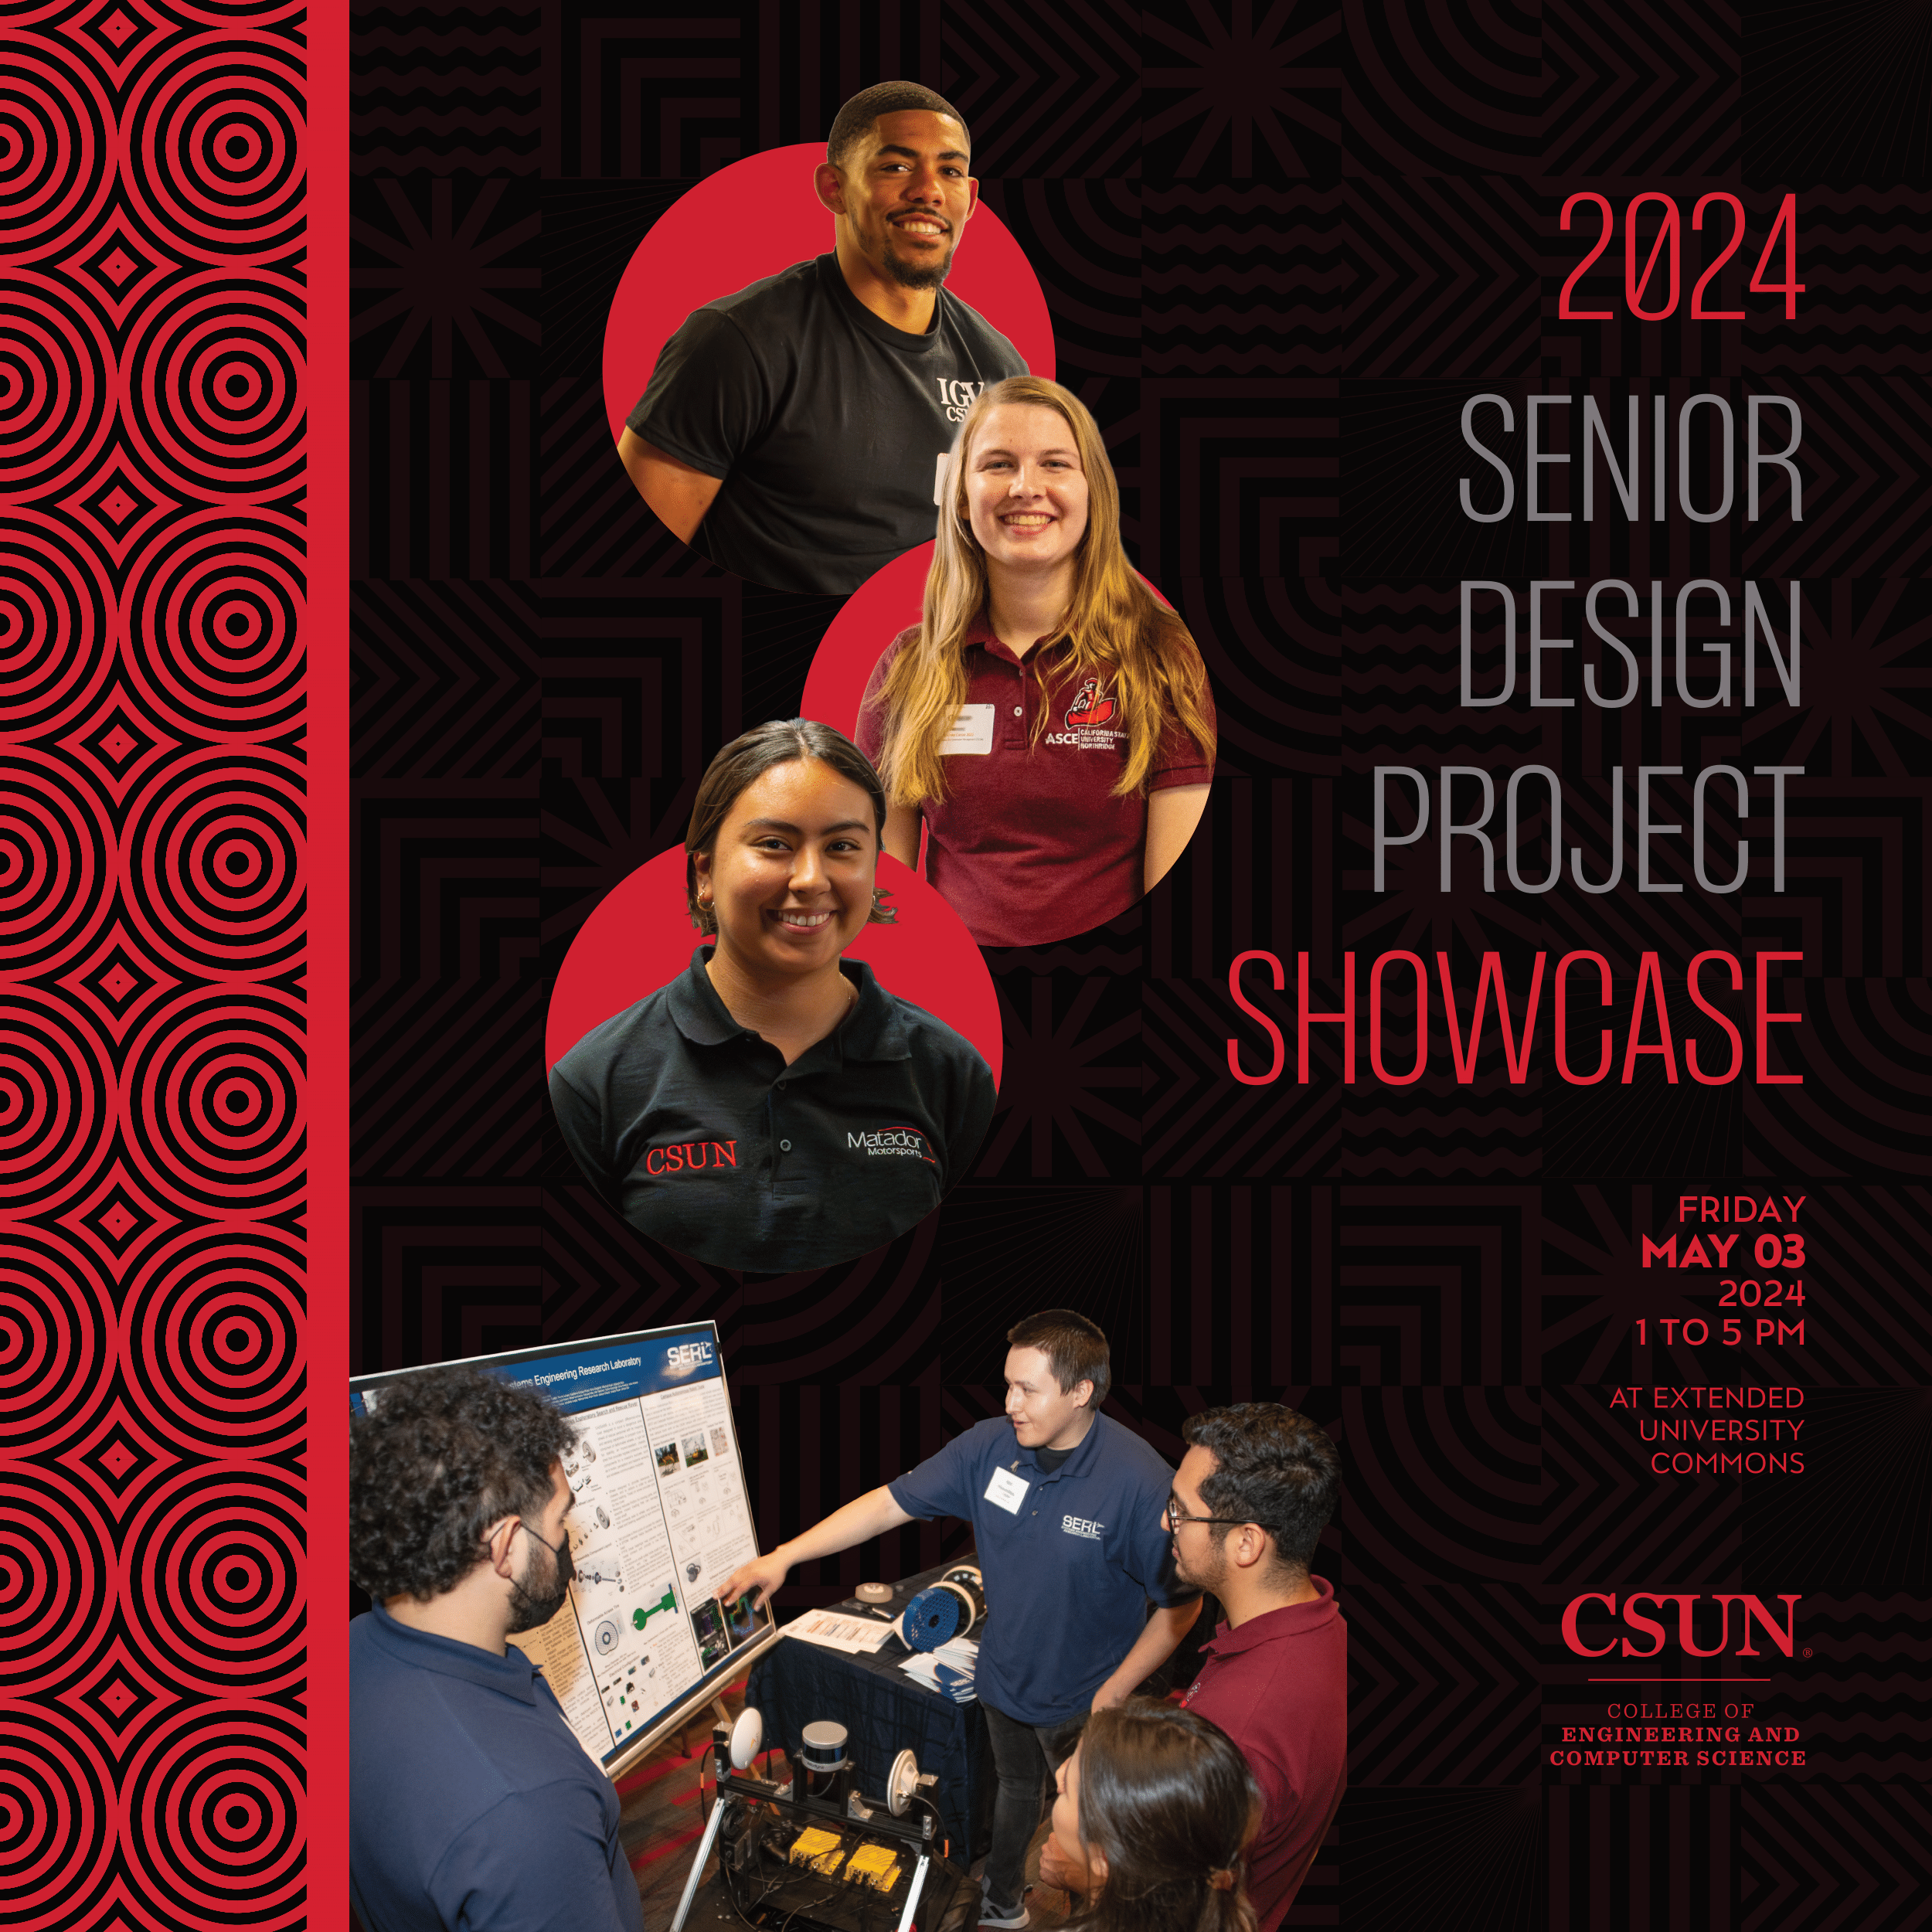 Senior Design Project Showcase 2024 from 1:00 - 5:00 PM on May 3rd, 2024.